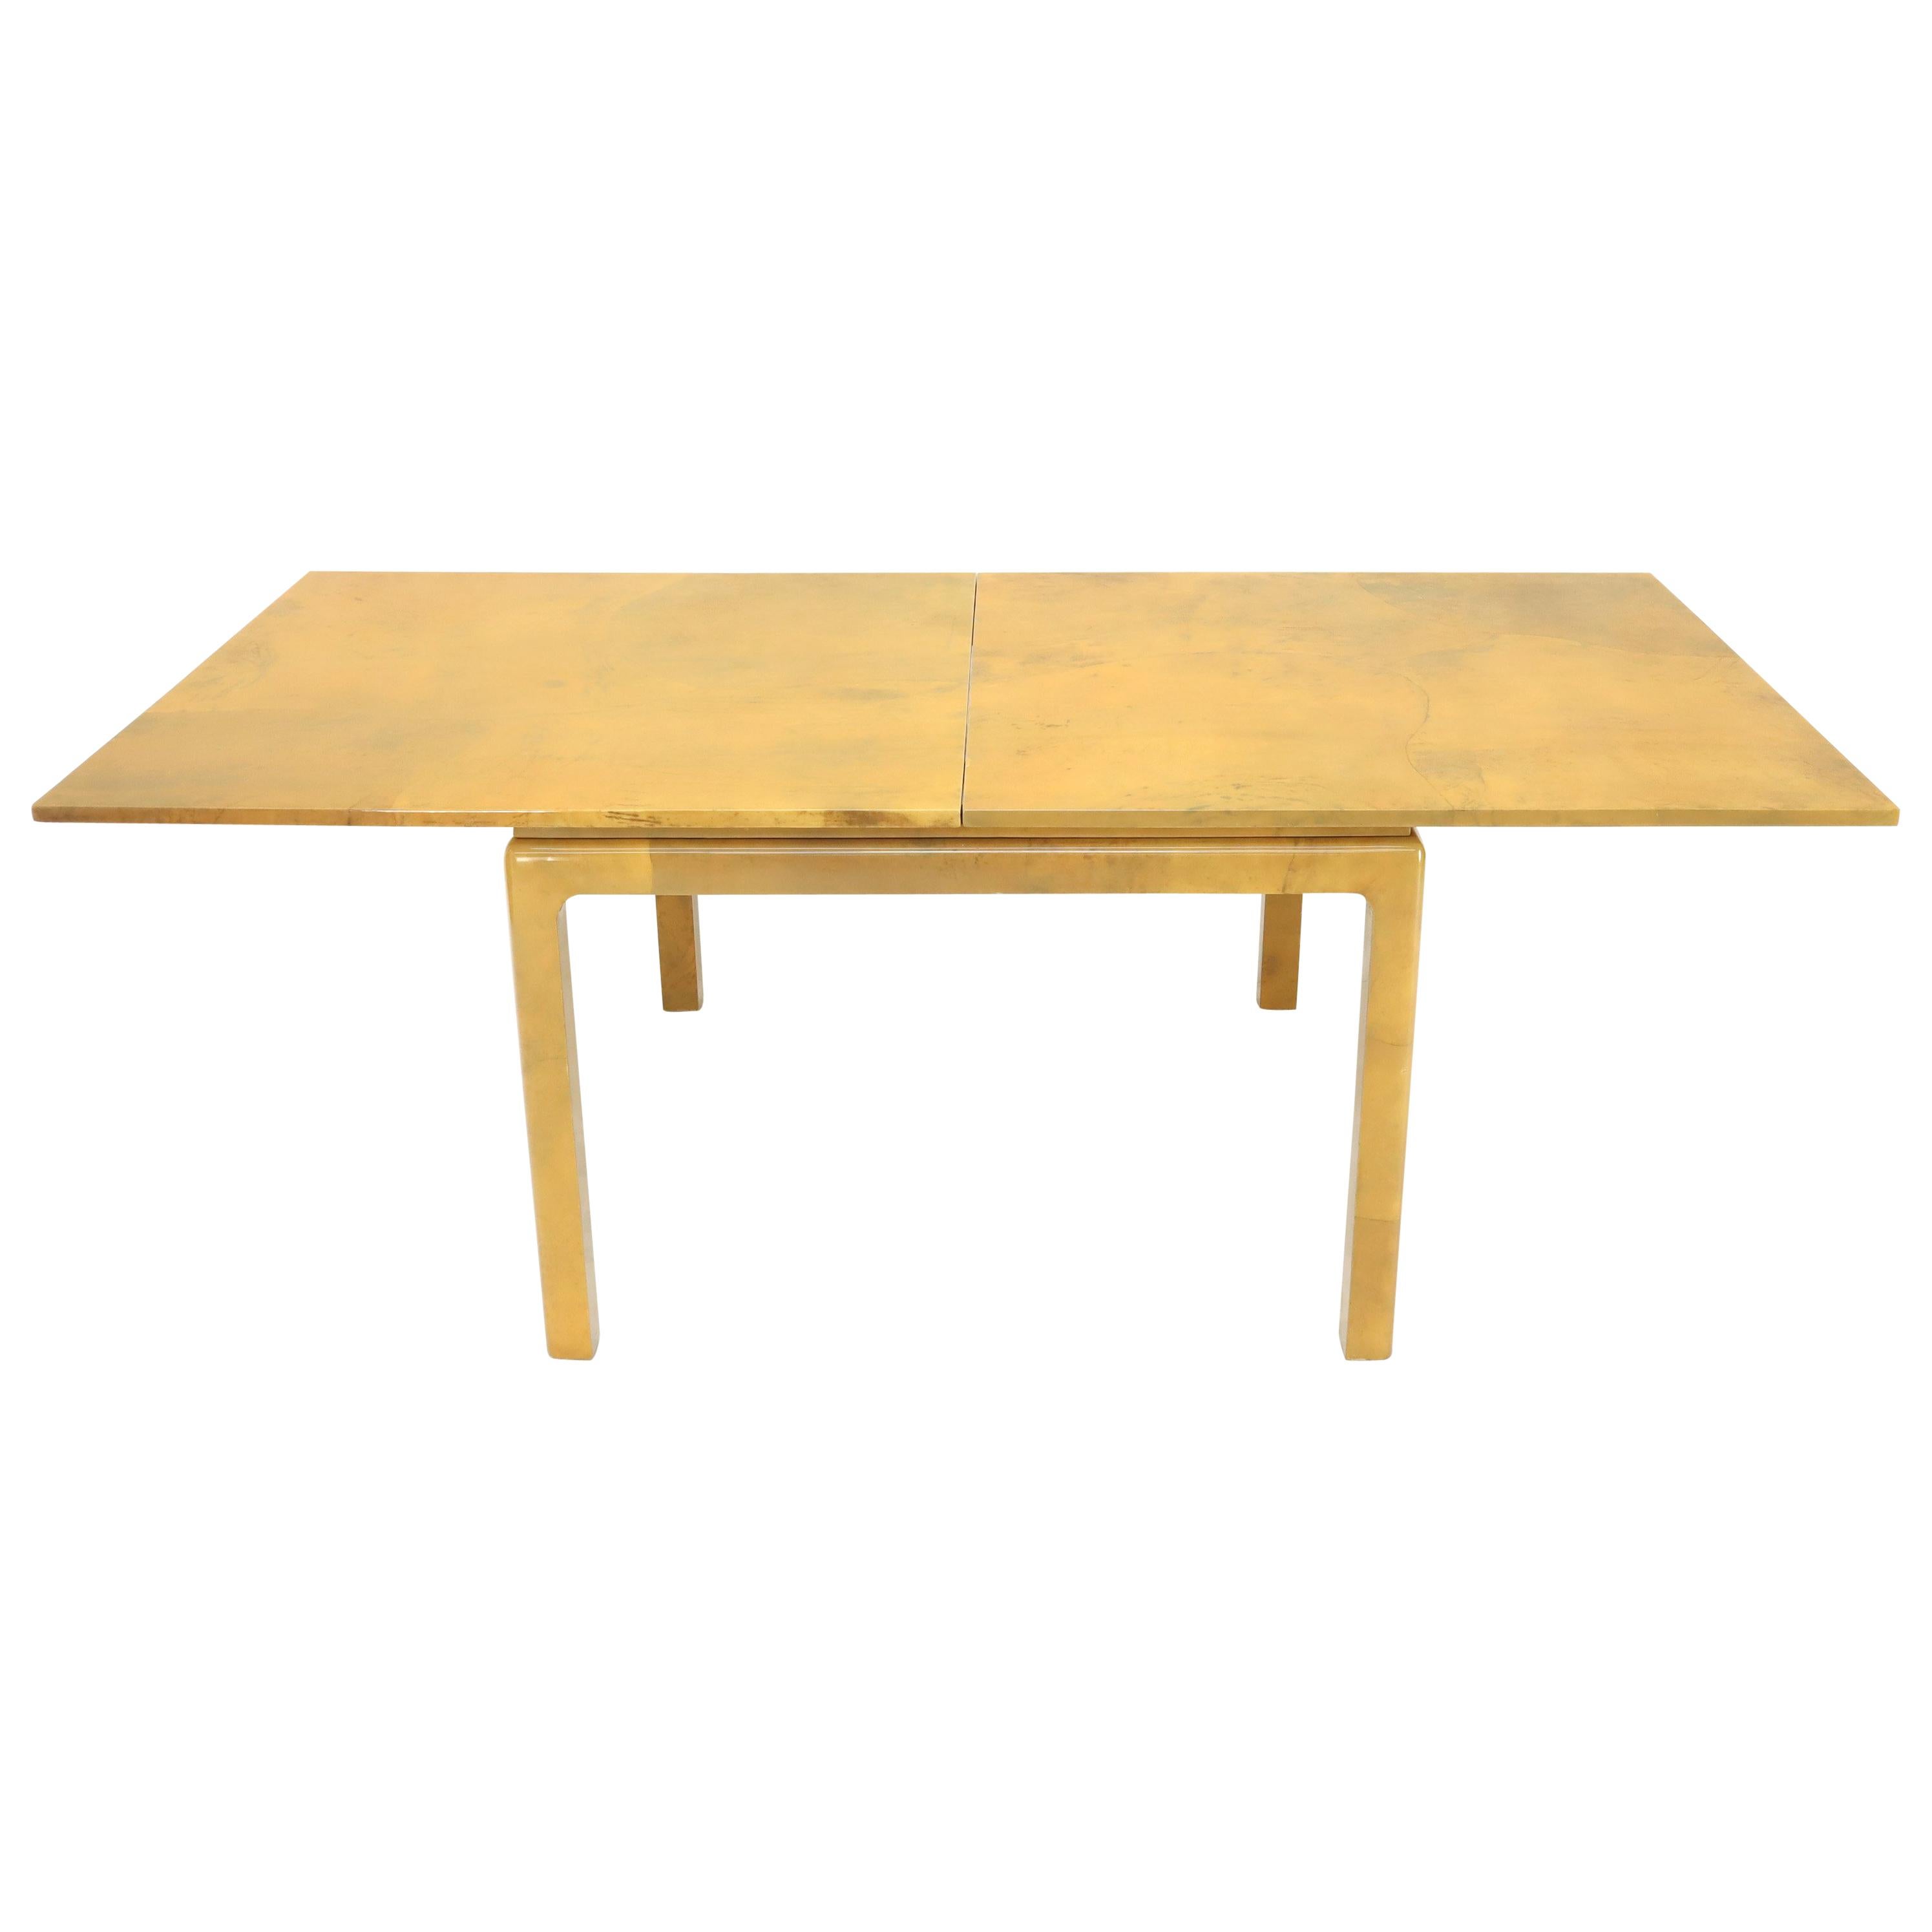 Lacqured GoatSkin Parchment Square Flip Top Dining Table 